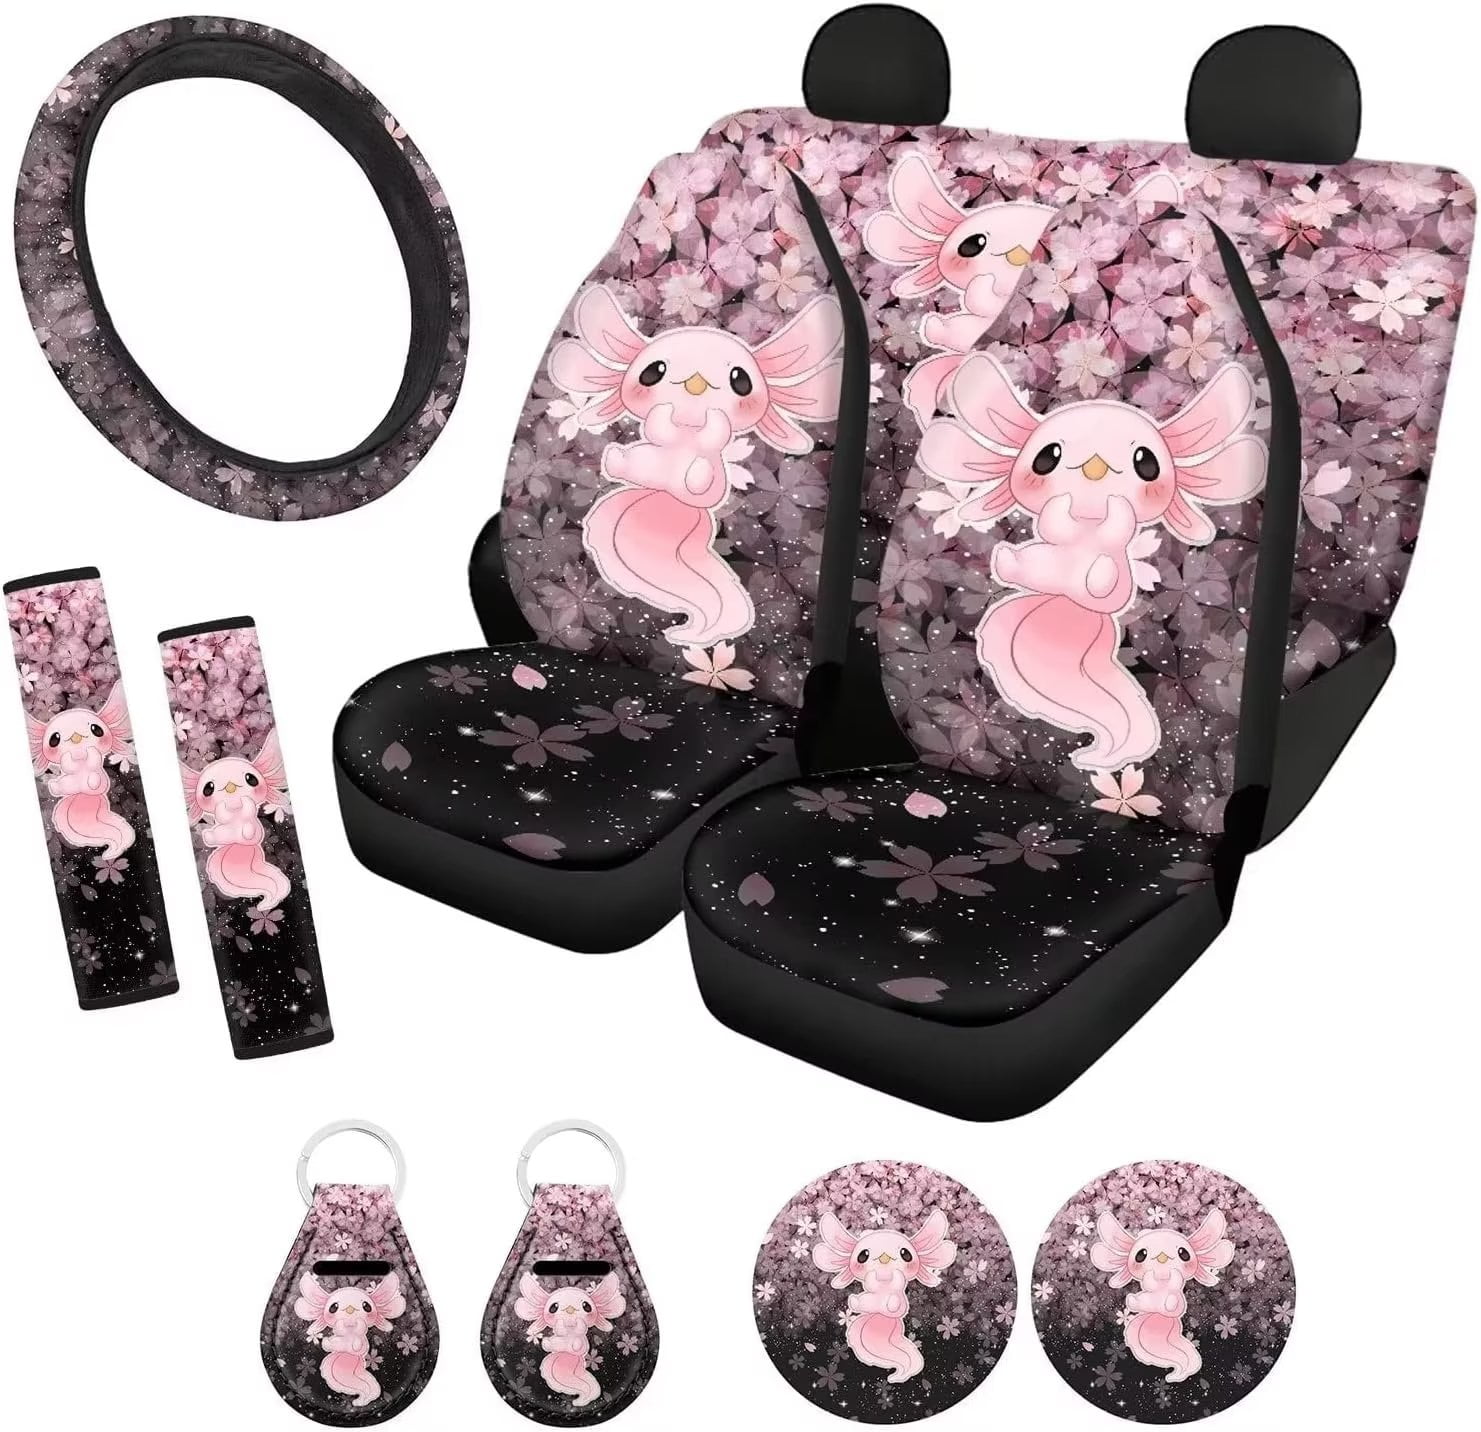 Pzuqiu Cow Print Accessories for Car Seat Covers Full Set 11 Pcs Pink  Steering Wheel Cover Vehicle Cup Coasters Holder Keychain for Women  Automotive Bucket Seat Protector 